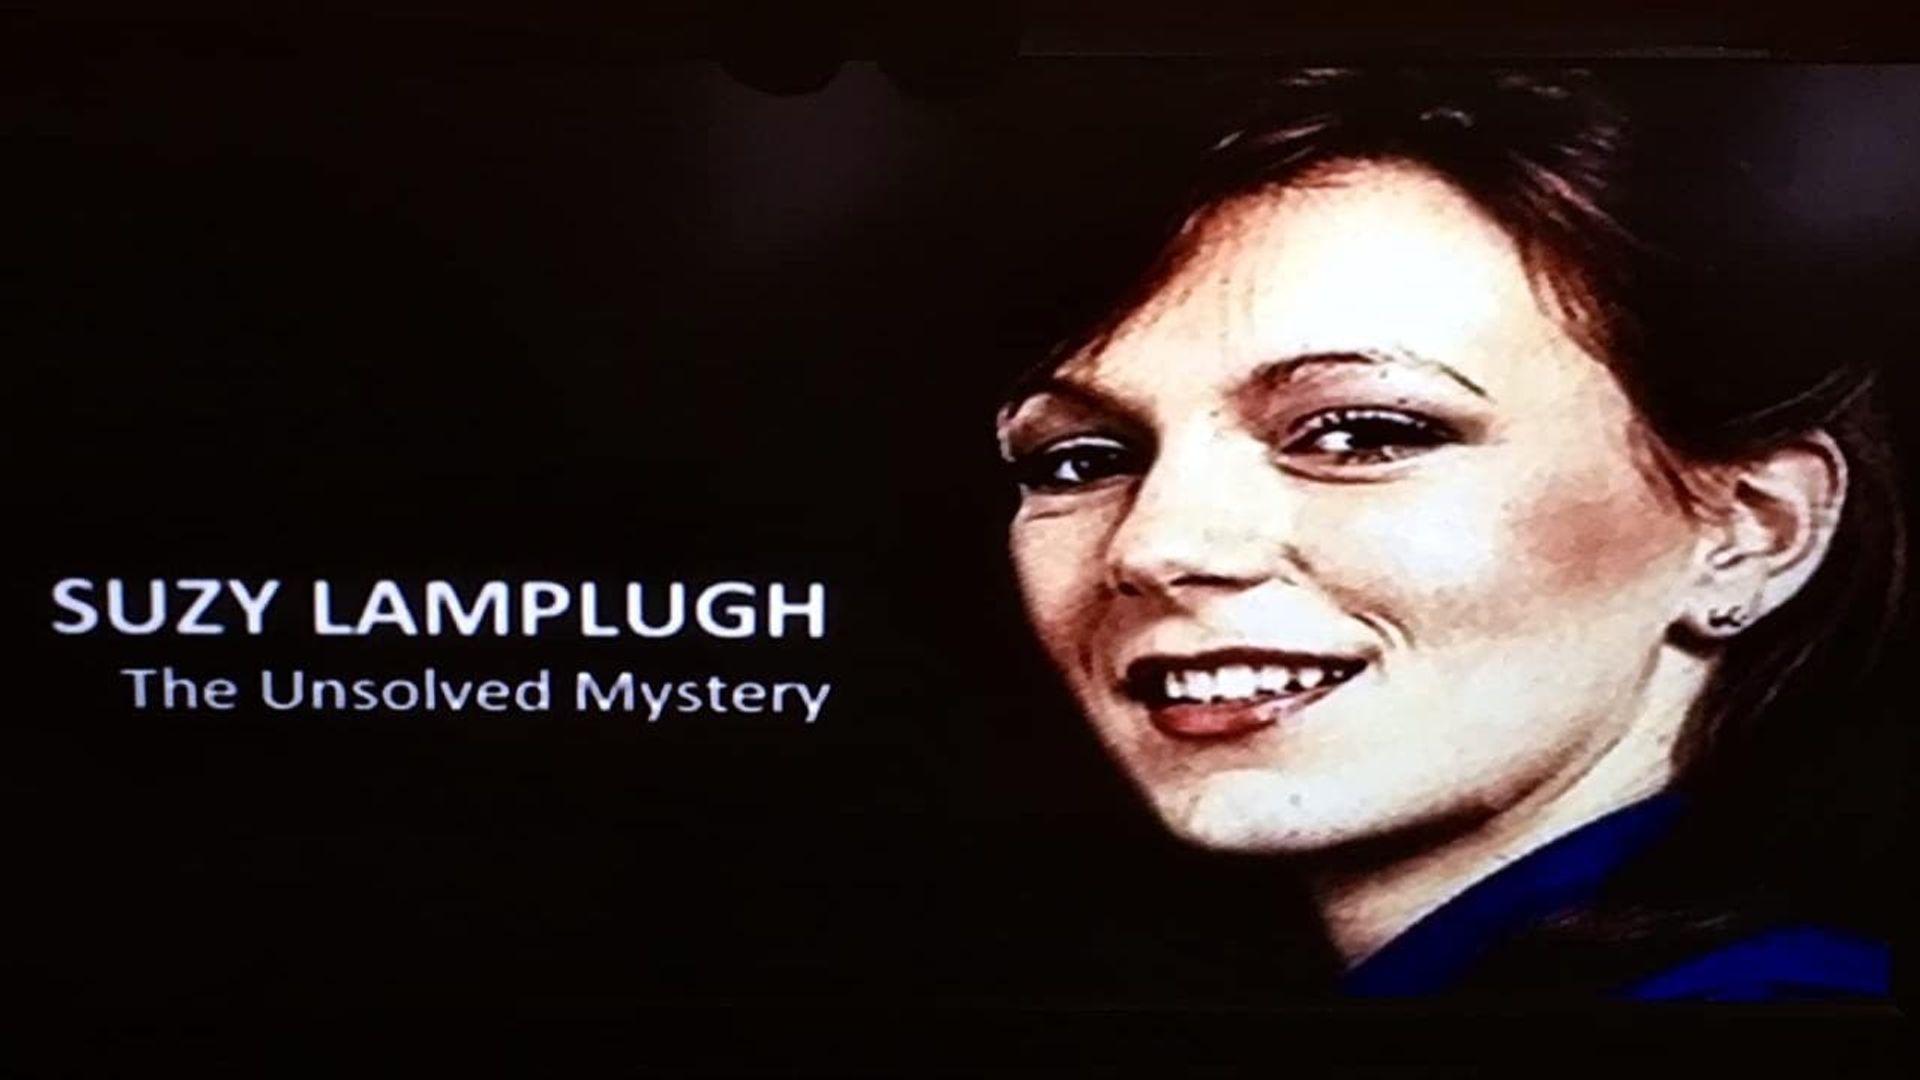 Suzy Lamplugh: The Unsolved Mystery background